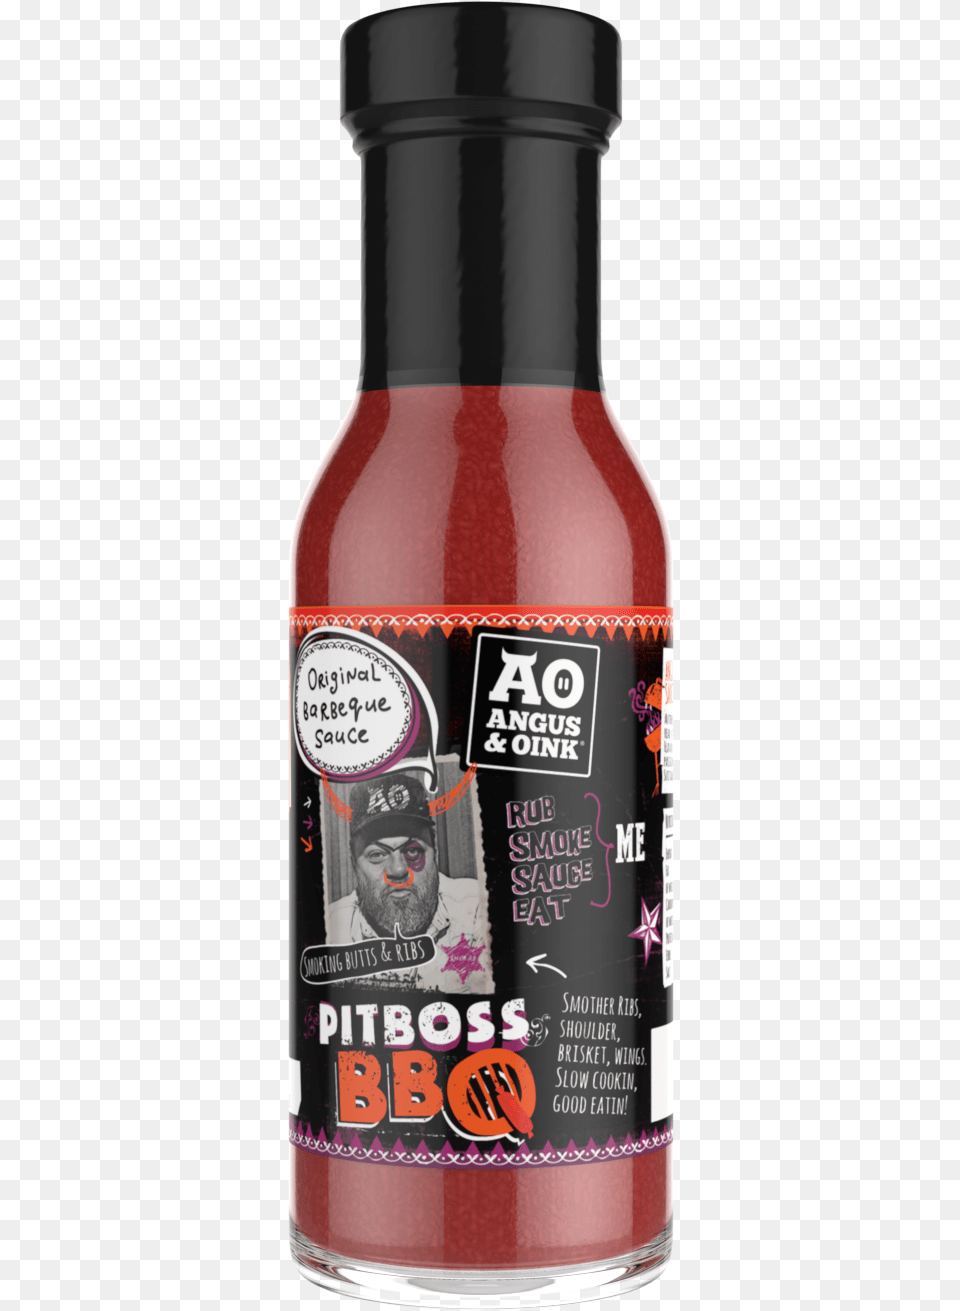 Pitboss Bbq Sauce Beer Bottle, Adult, Person, Man, Male Png Image